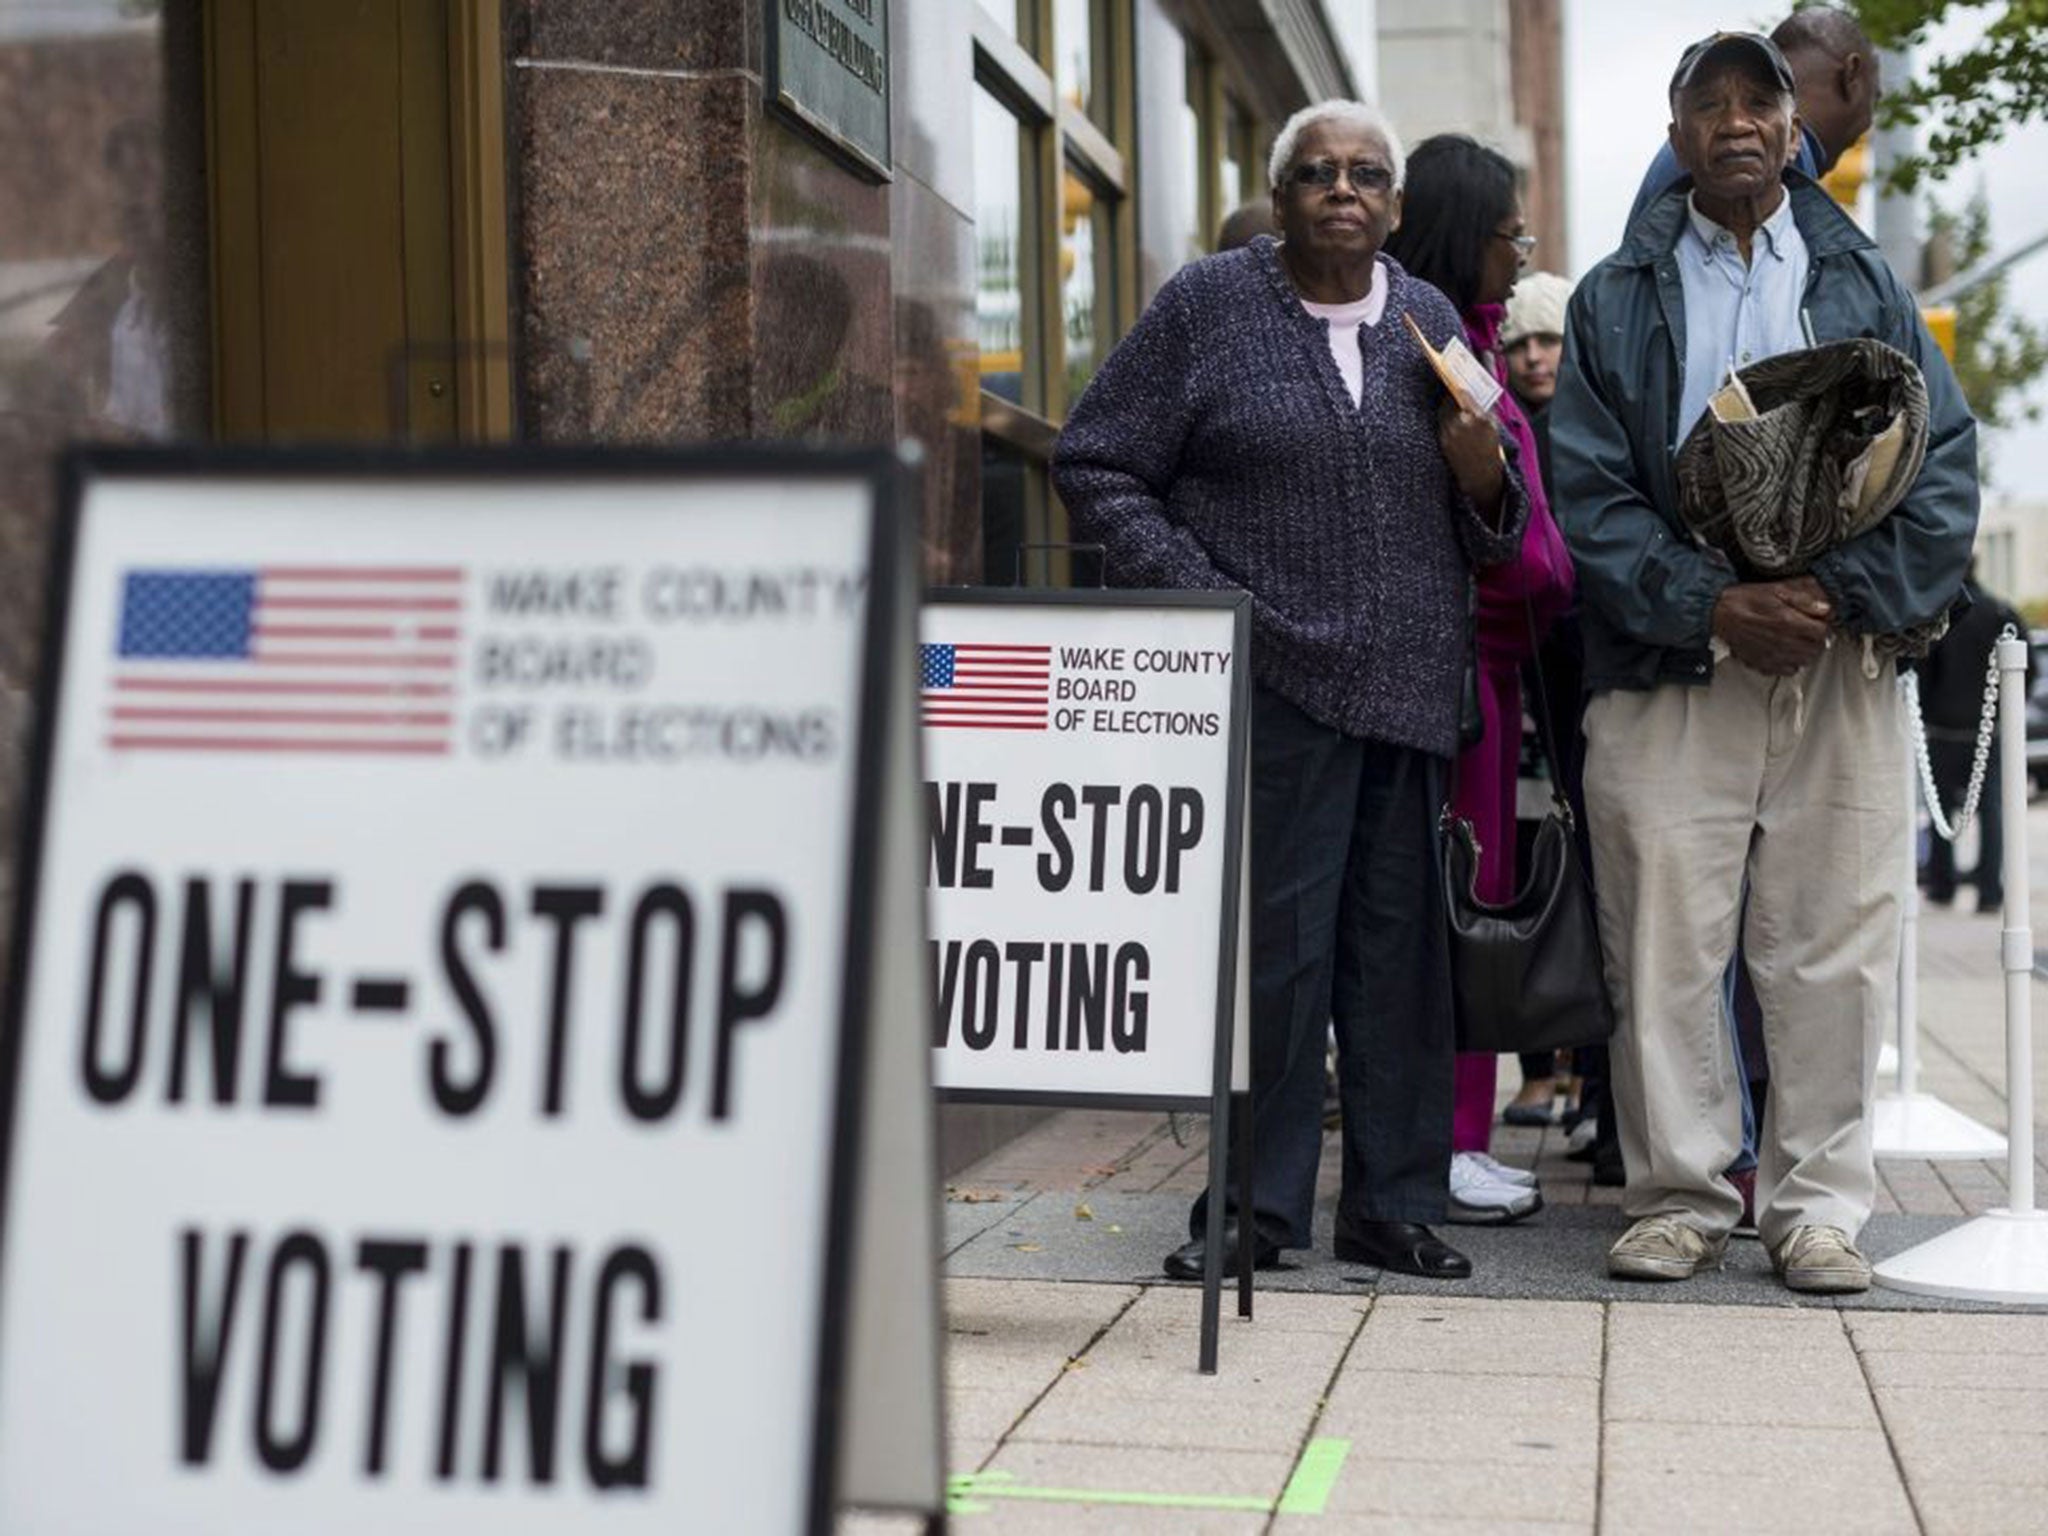 Residents stand in like to take part in the last day of early voting in Raleigh, North Carolina